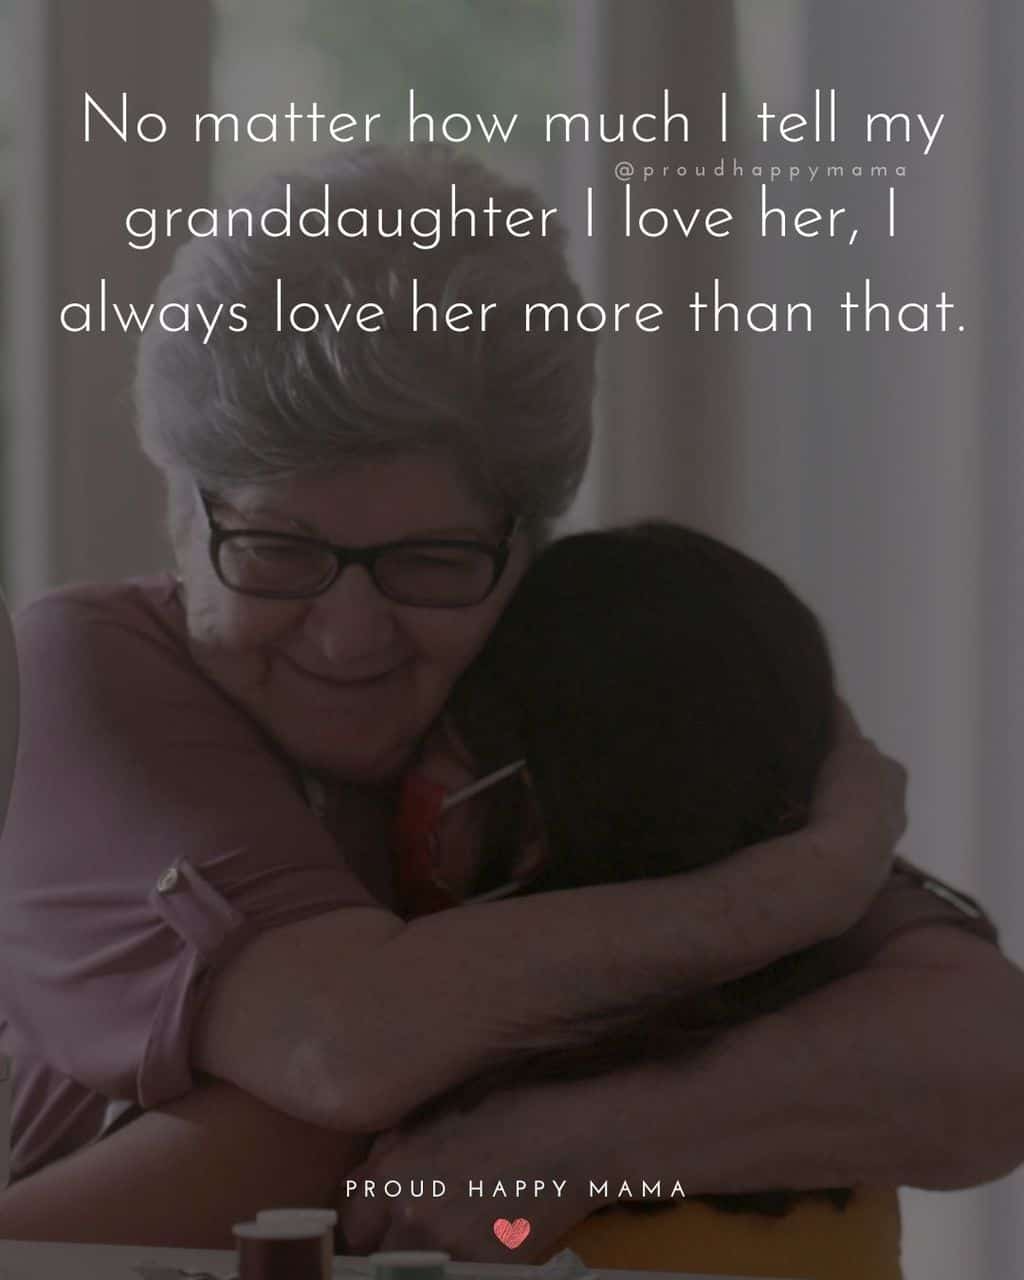 Granddaughter Quotes - No matter how much I tell my granddaughter I love her, I always love her more than that.’